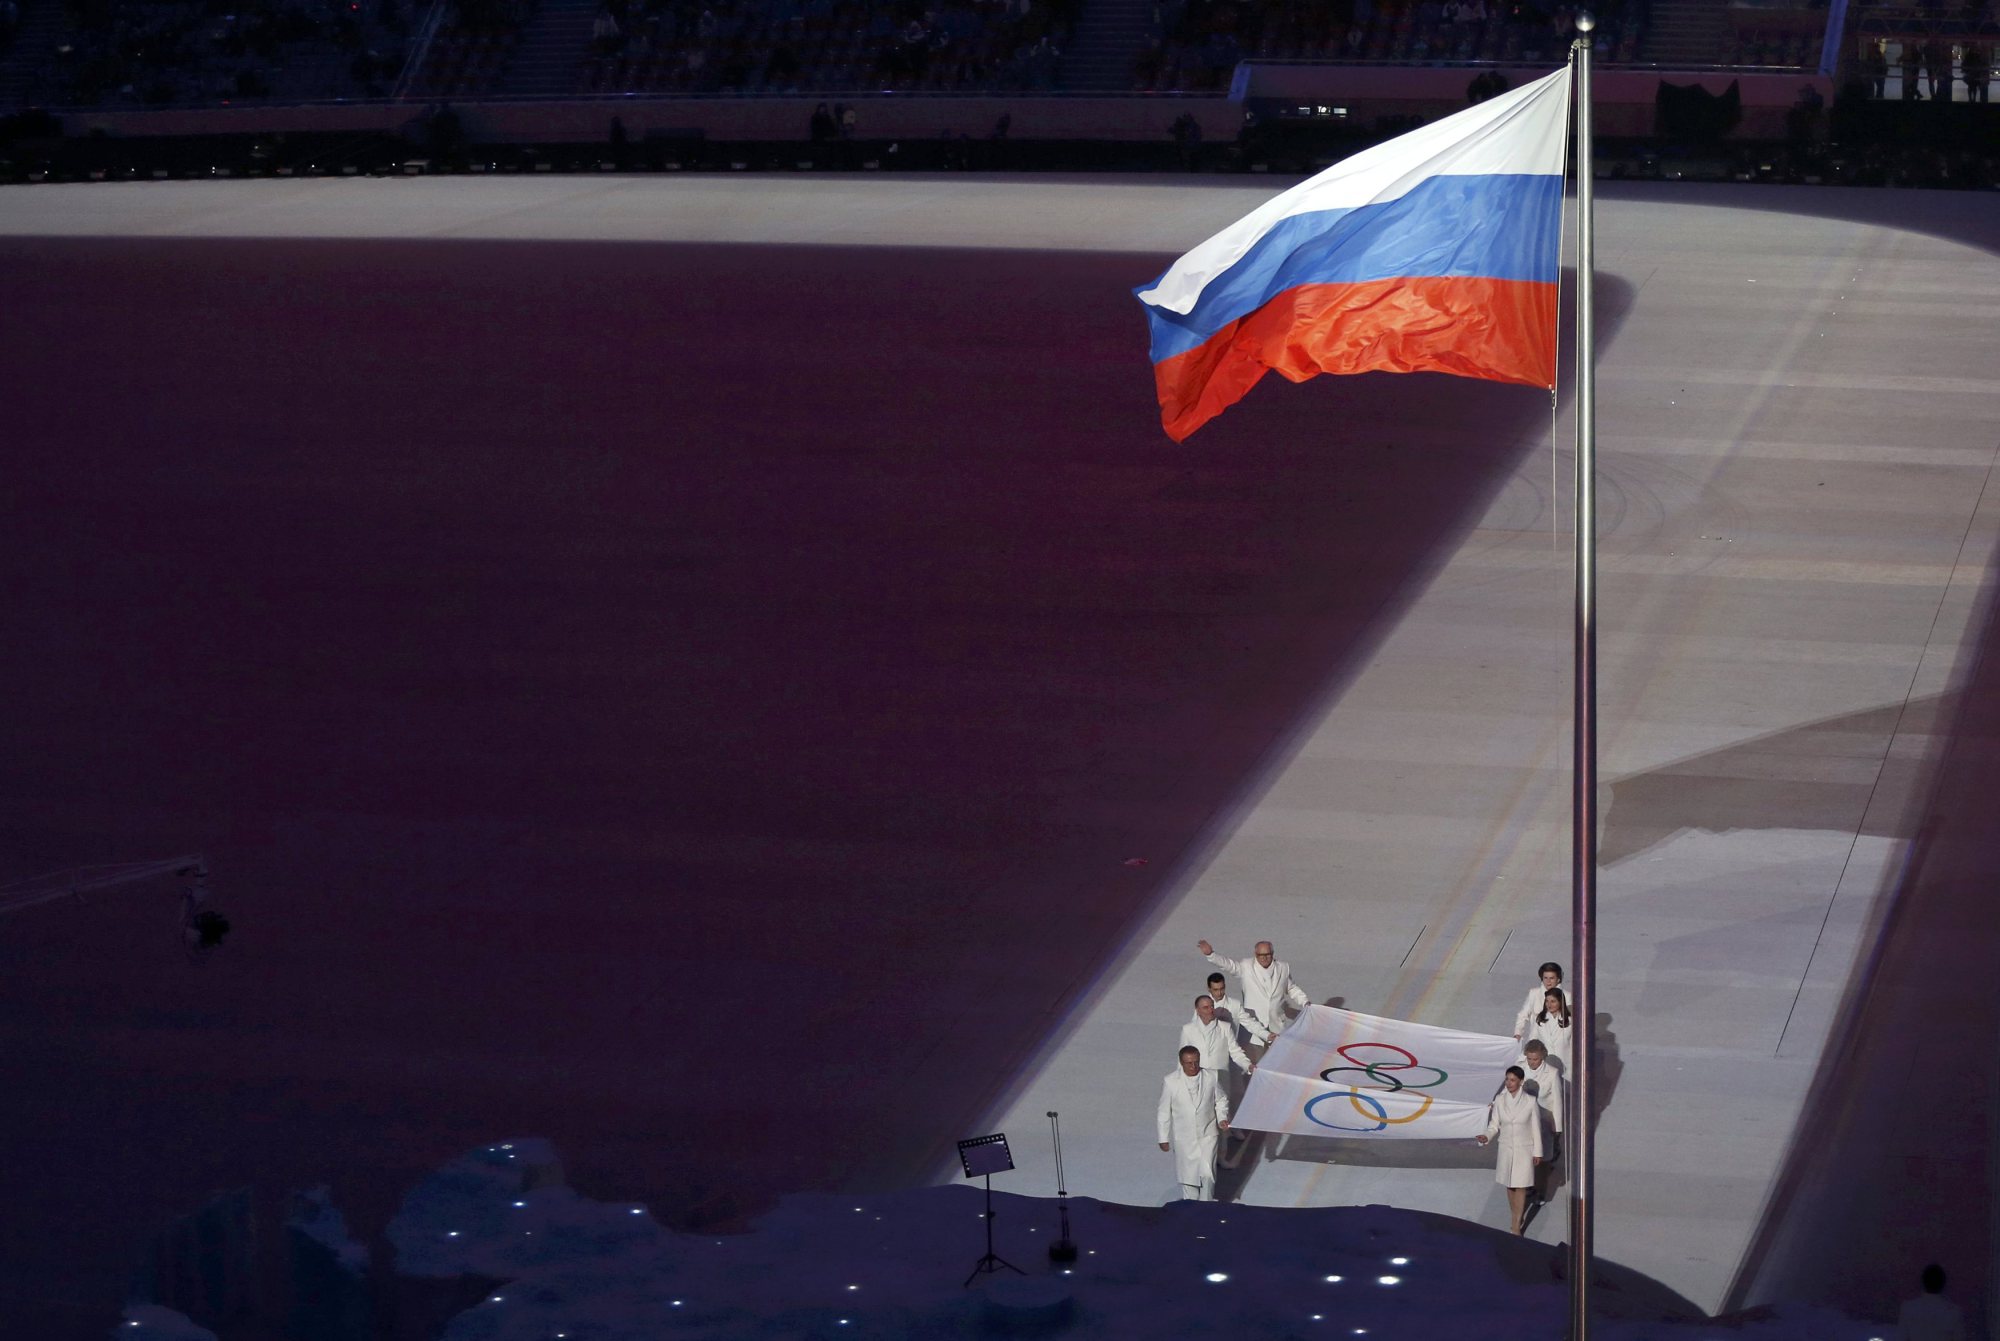 The Olympic flag is paraded past the Russian flag.